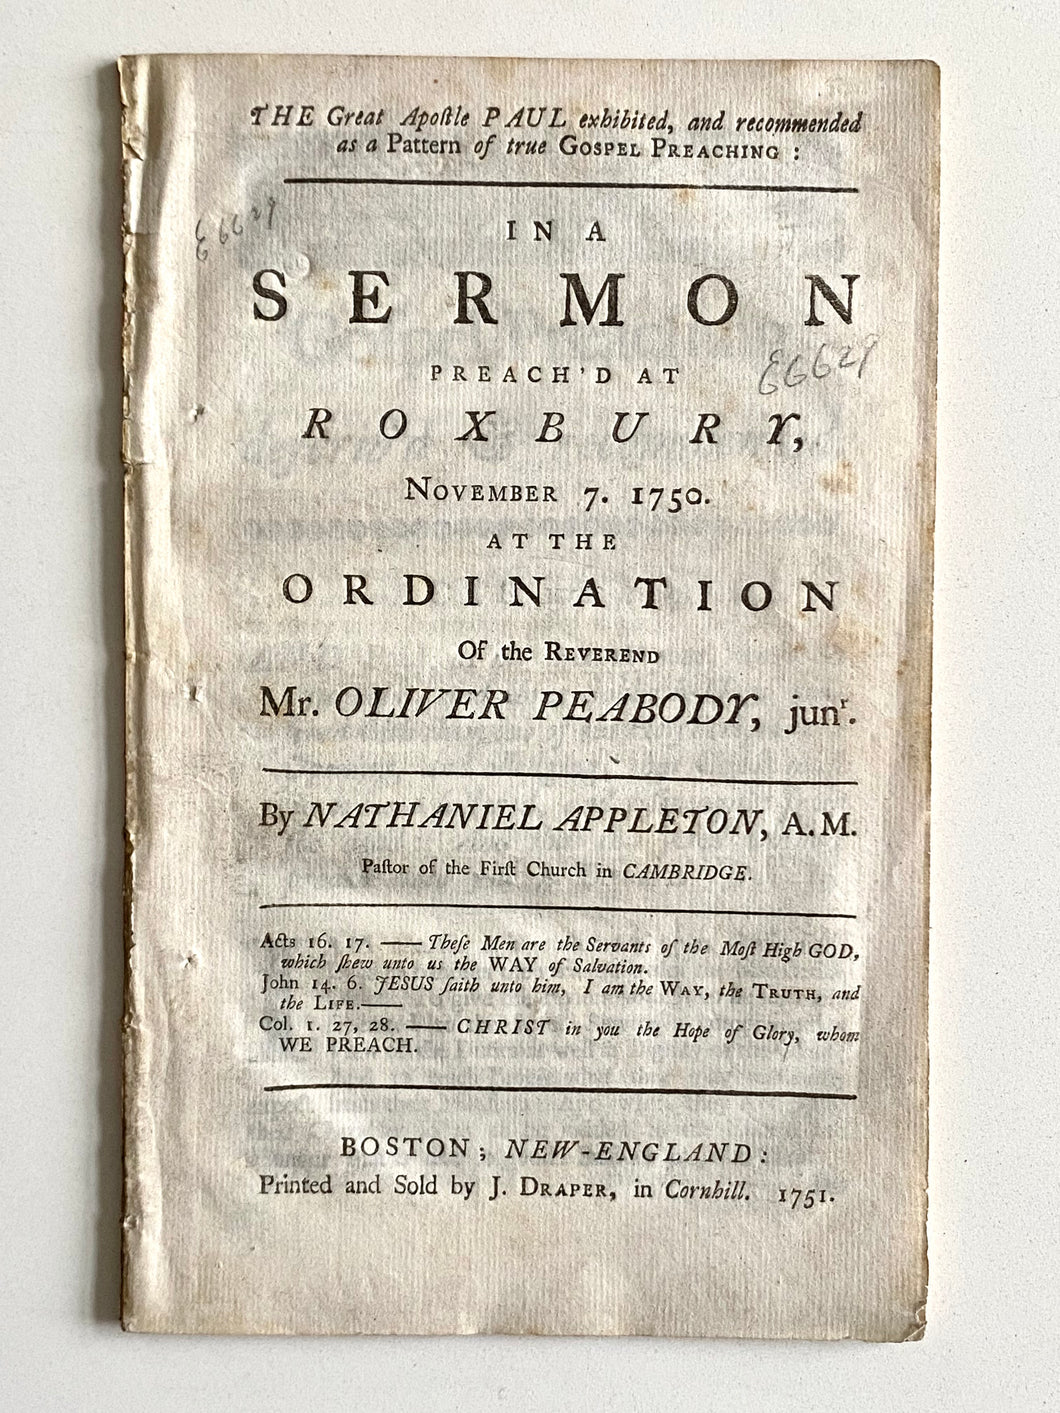 1751 OLIVER PEABODY. The Apostle Paul a Pattern of True Gospel Preaching. Natick Indian MIssionary.